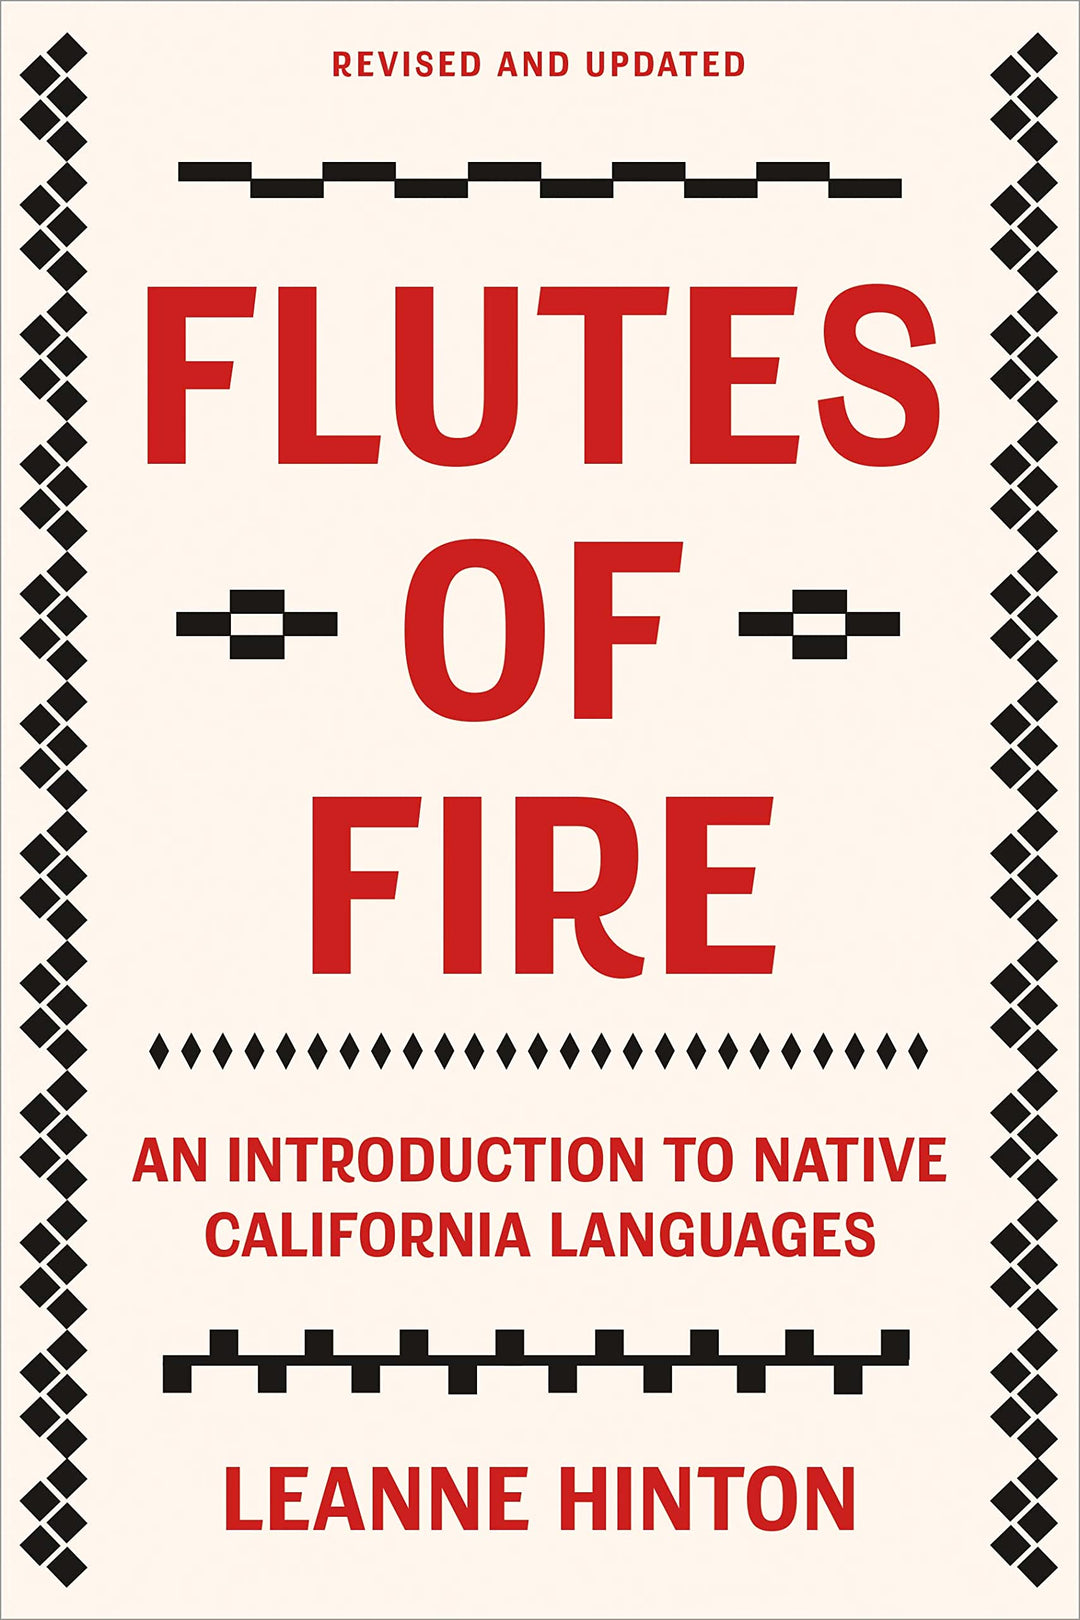 Flutes of Fire: An Introduction to Native California Languages by Leanne Hinton